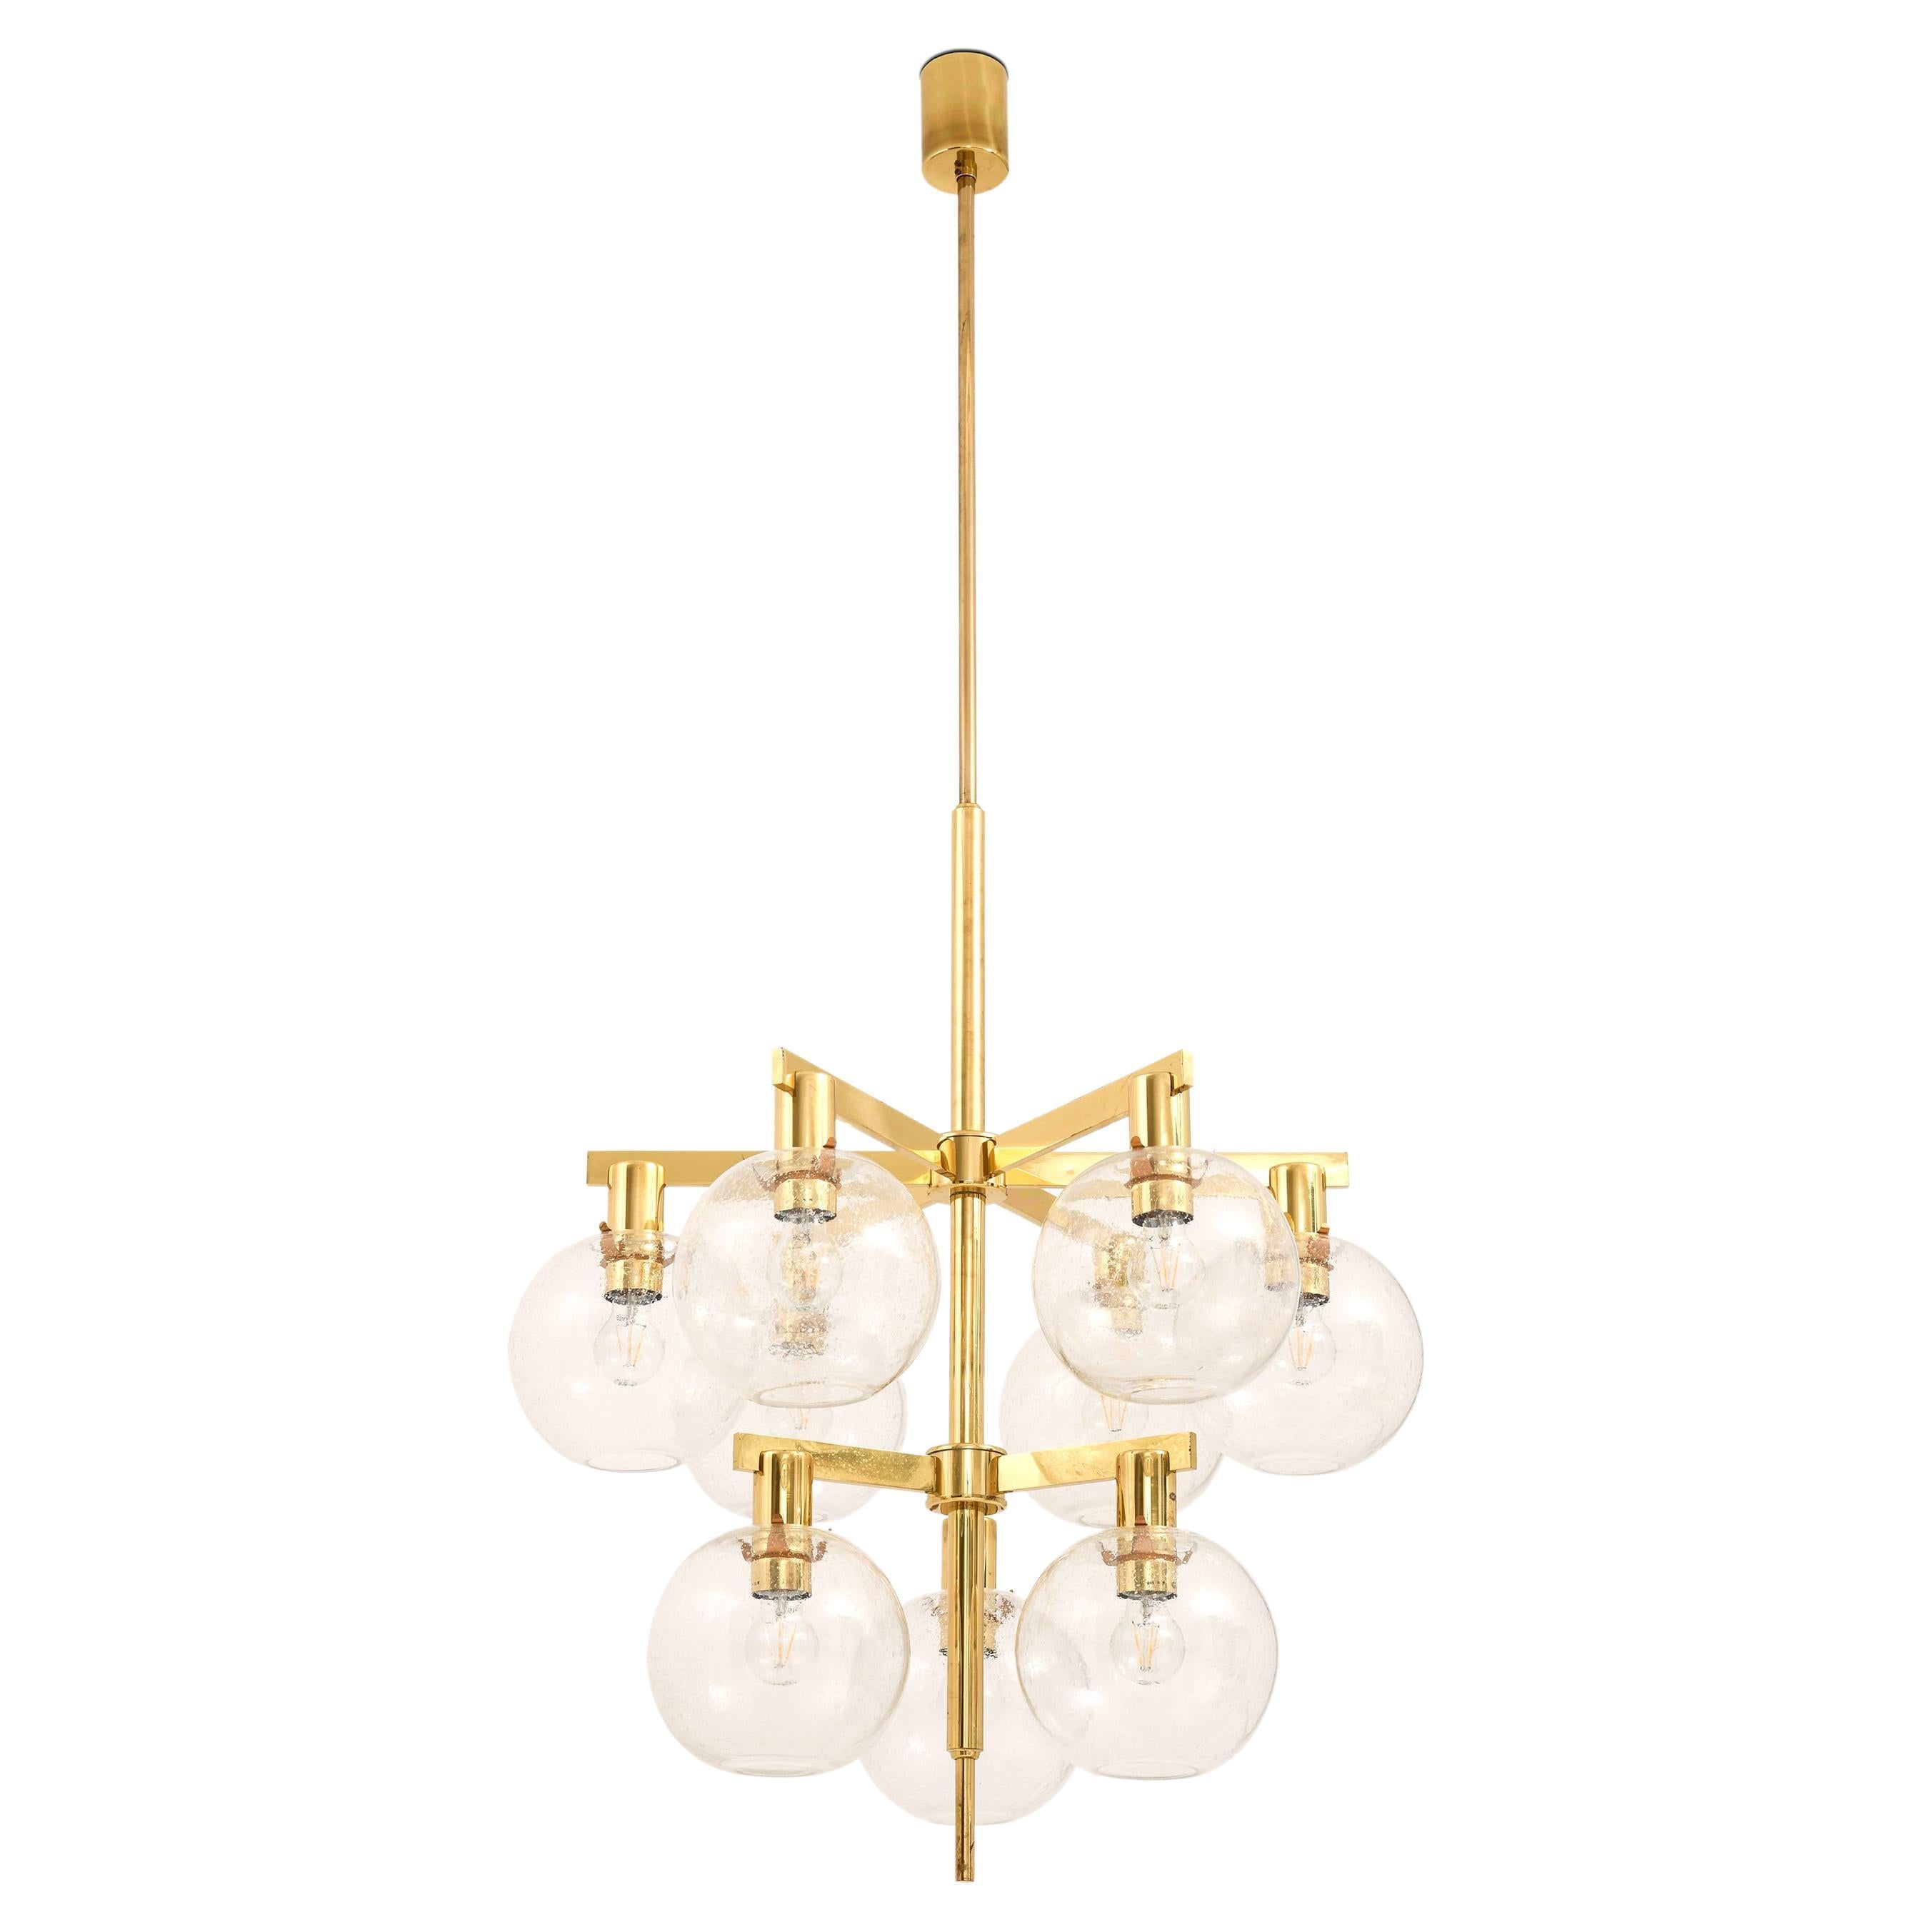 Large Ceiling Lamp Chandelier in Brass and Glass by Hans-Agne Jakobsson, 1950's For Sale